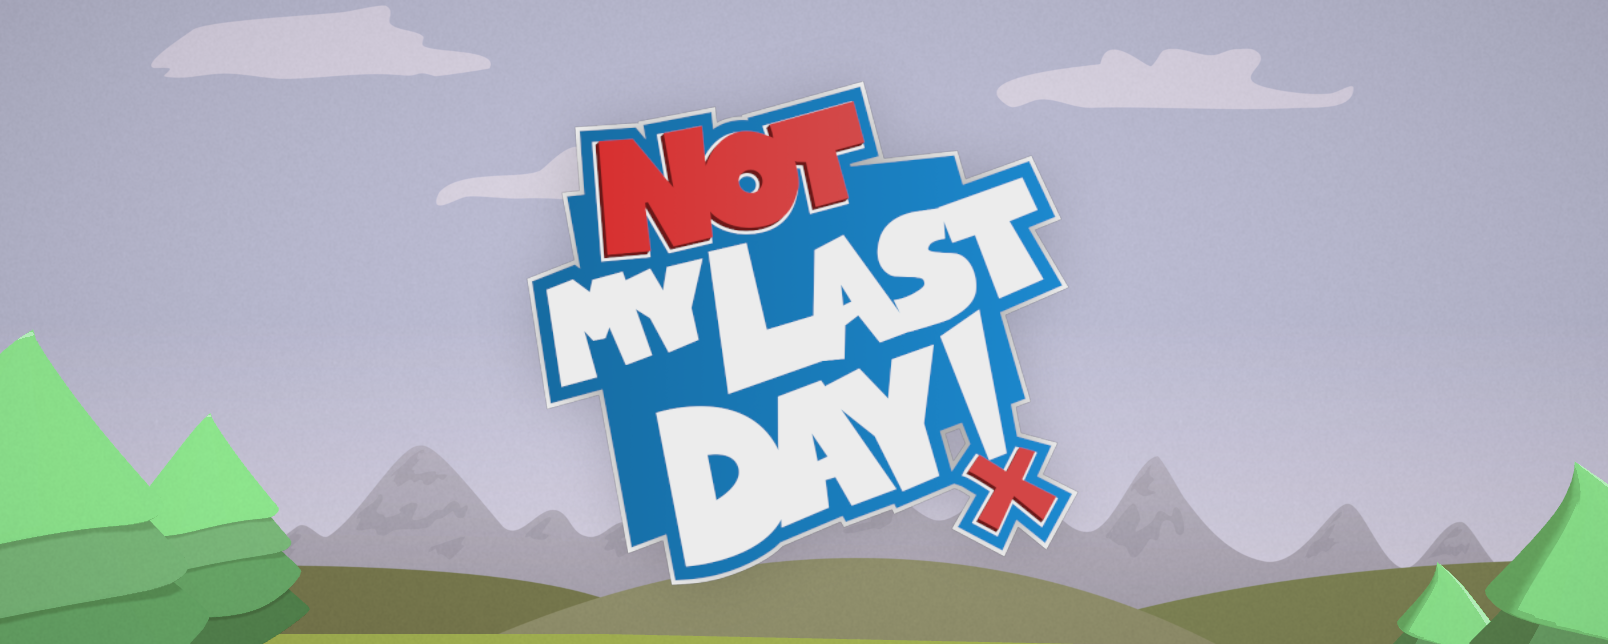 Not my last day!